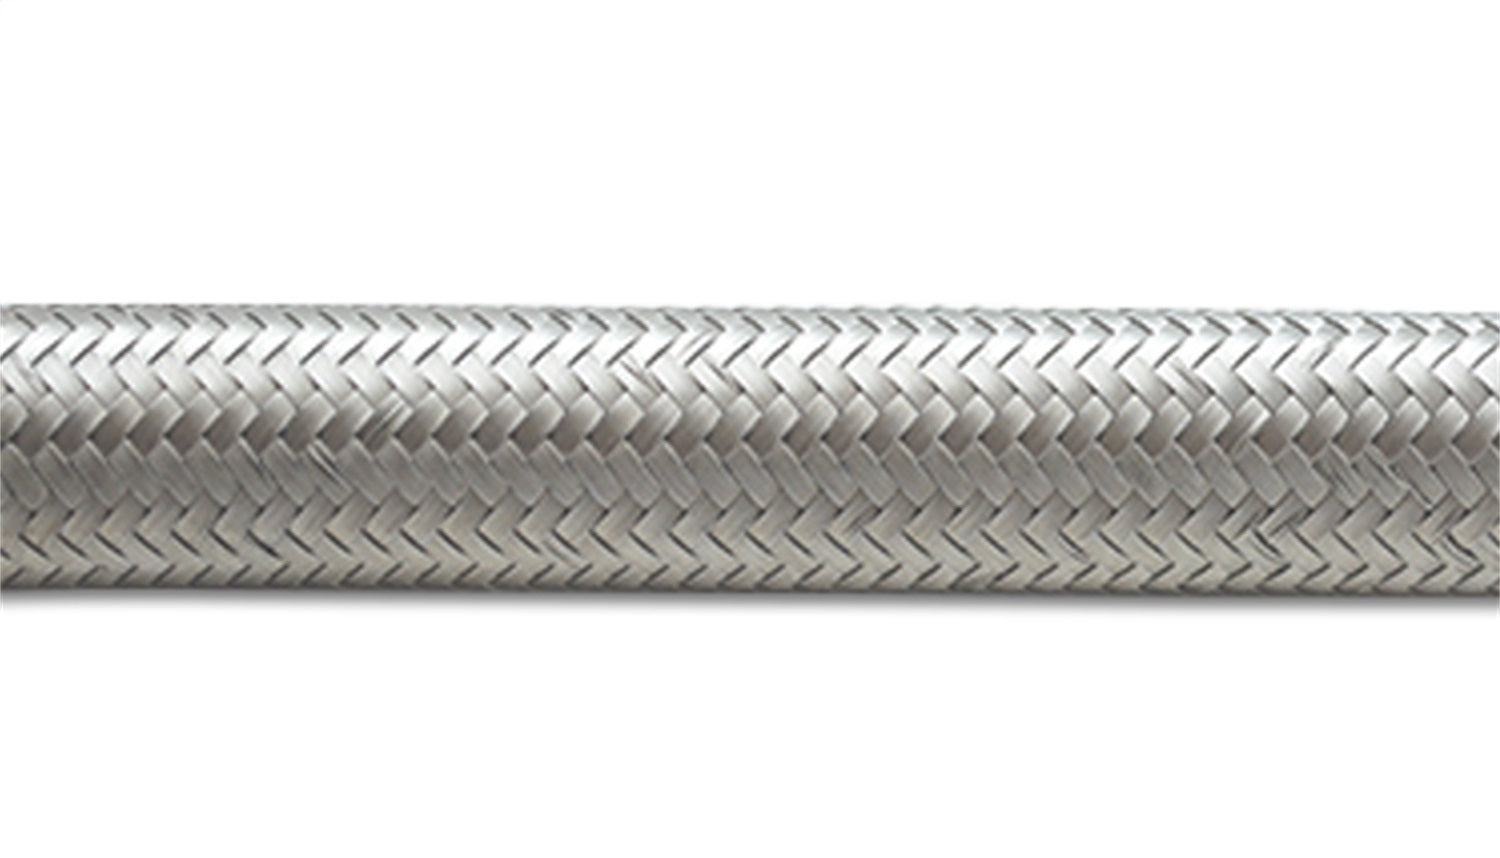 Vibrant Performance 2ft Roll of Stainless Steel Braided Flex Hose; AN Size: -8; Hose ID 0.44"